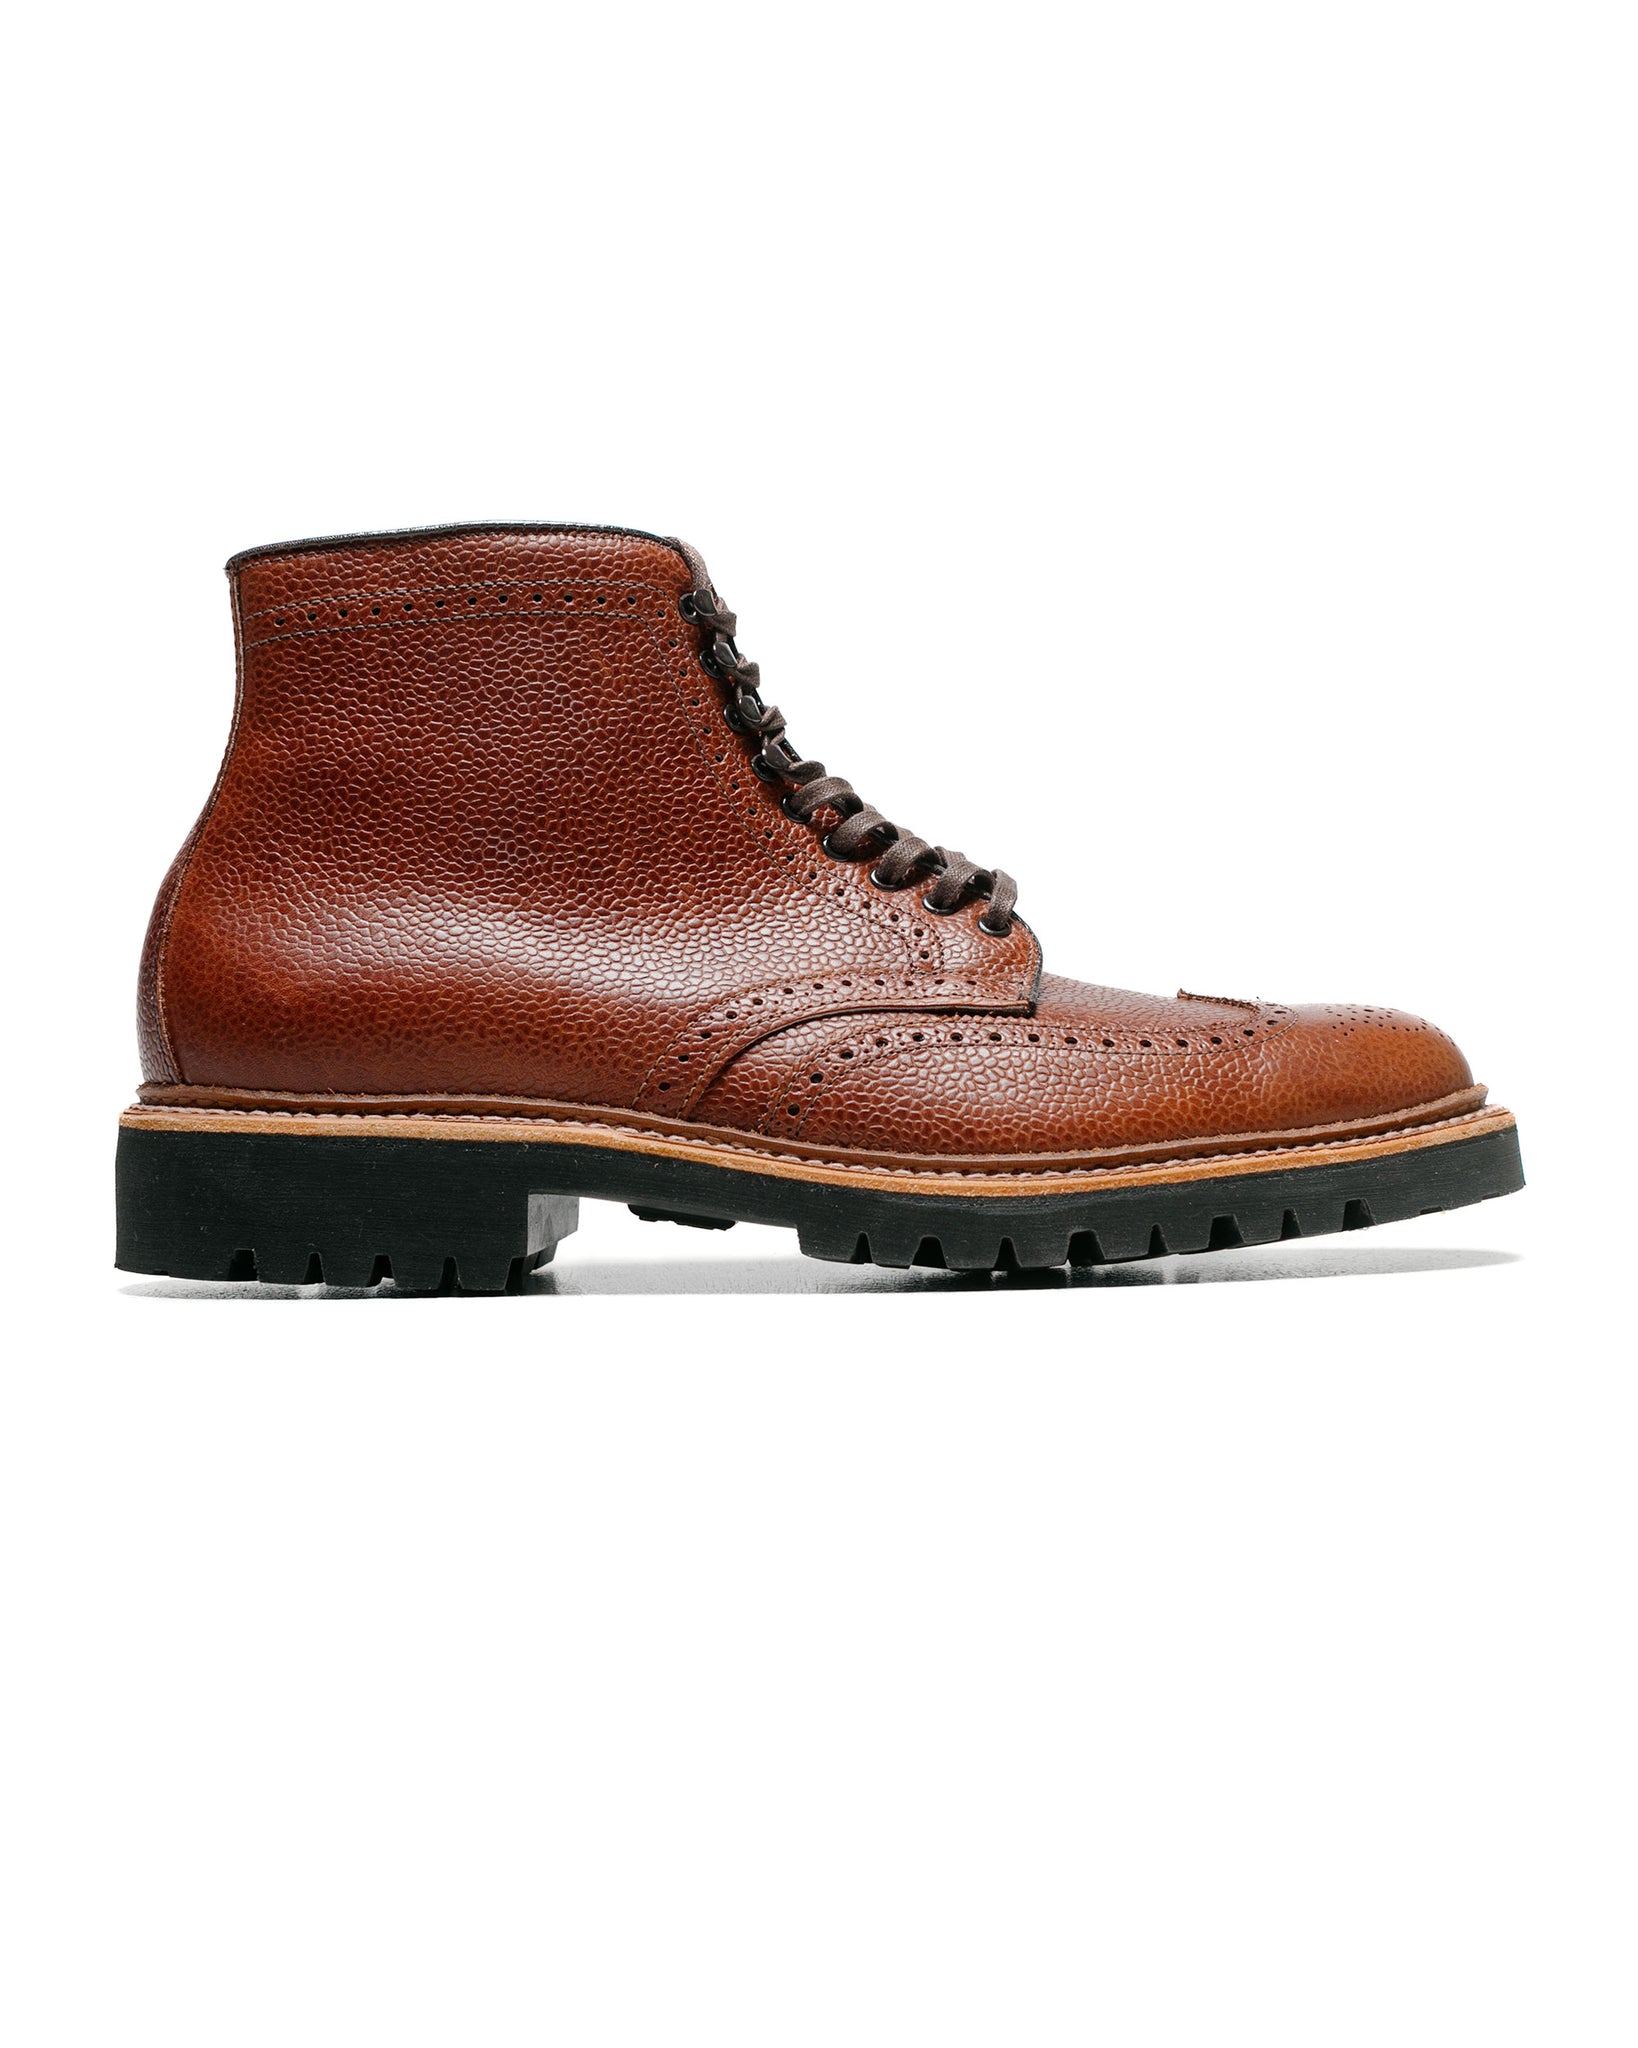 Alden Short Wing Boot Brown Scotch Grain With Lug Sole